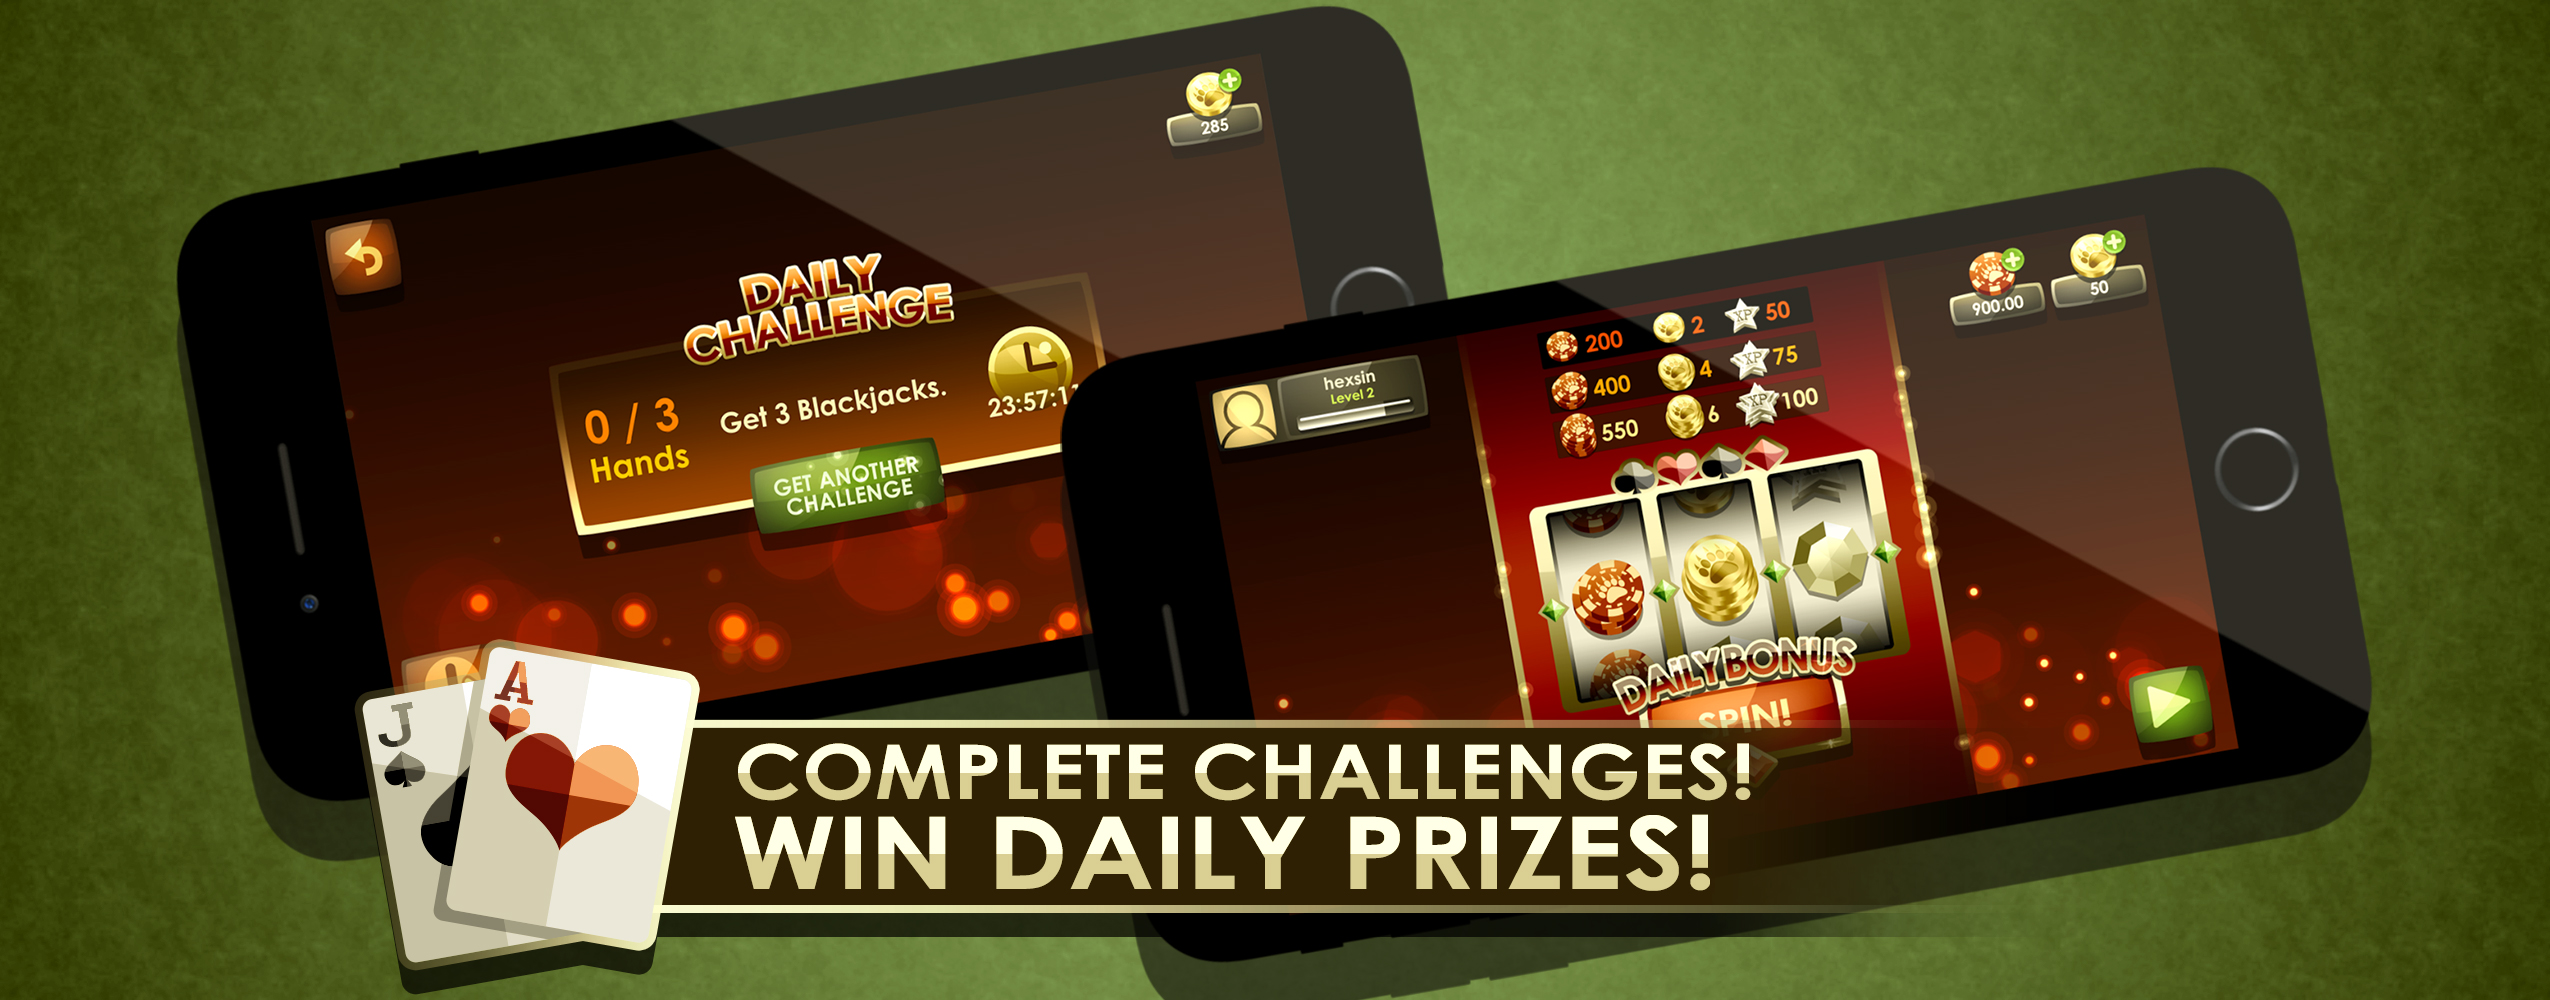 Complete Challenges! Win daily prizes!